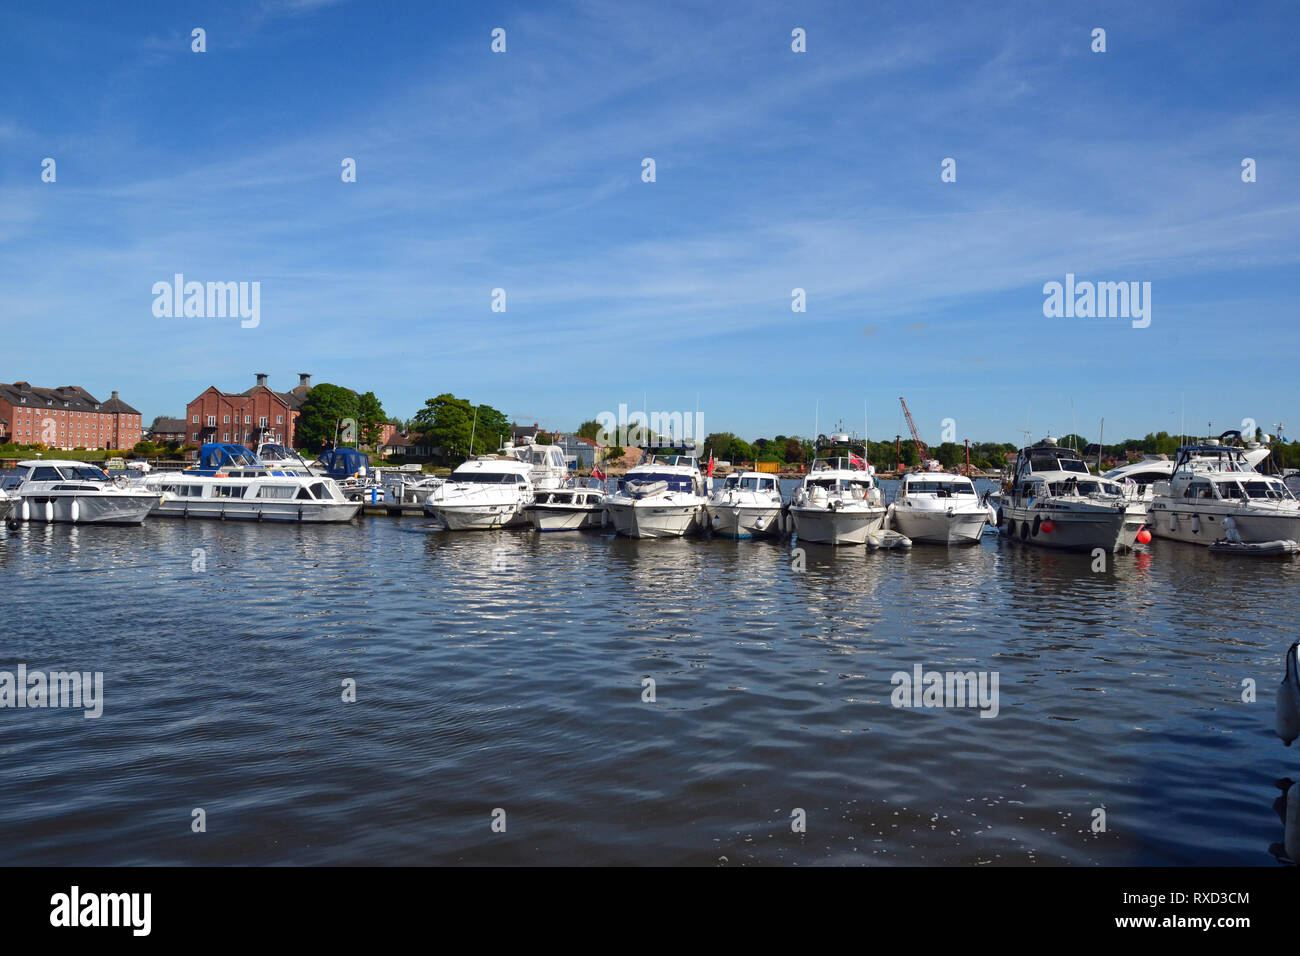 Yachts moored on Oulton Broad, Suffolk, UK Stock Photo